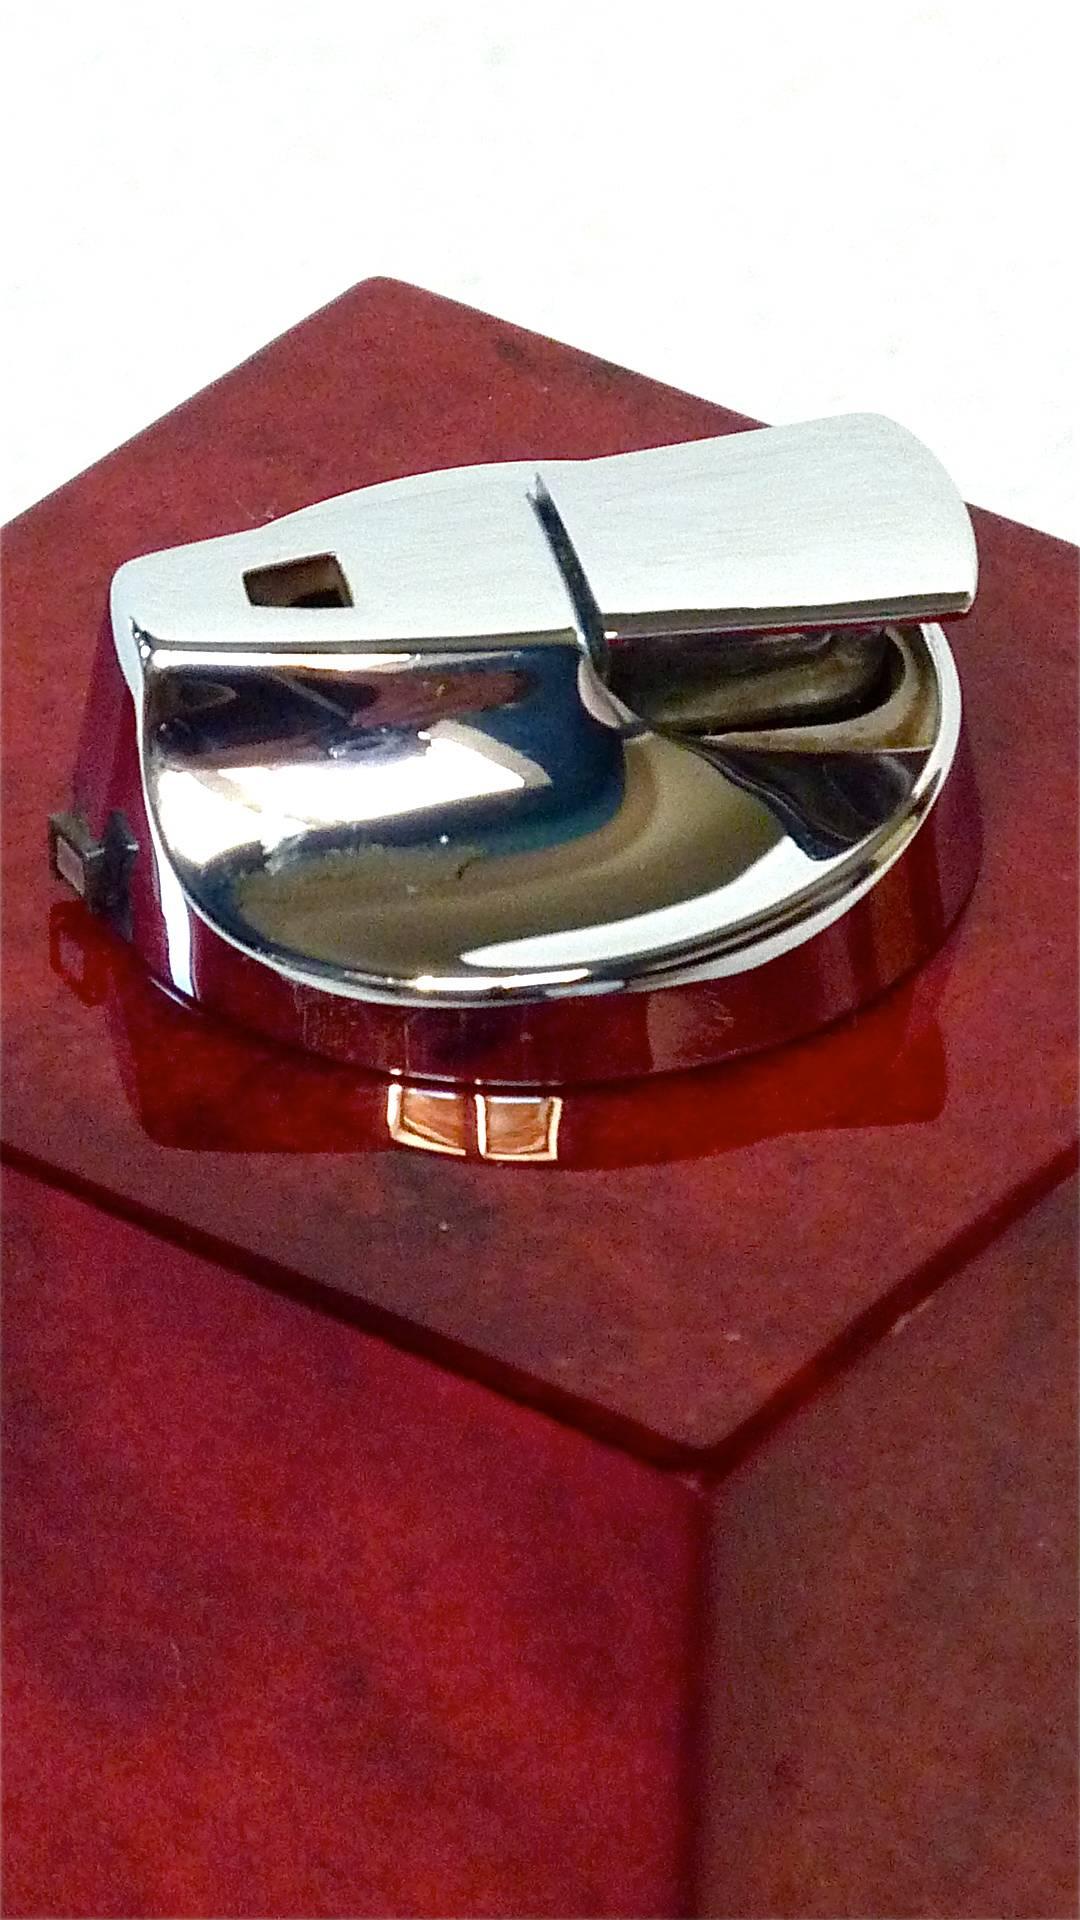 Varnished Luxus Vintage Table Lighter Light Red Goatskin Chrome by Aldo Tura, Italy 1960s